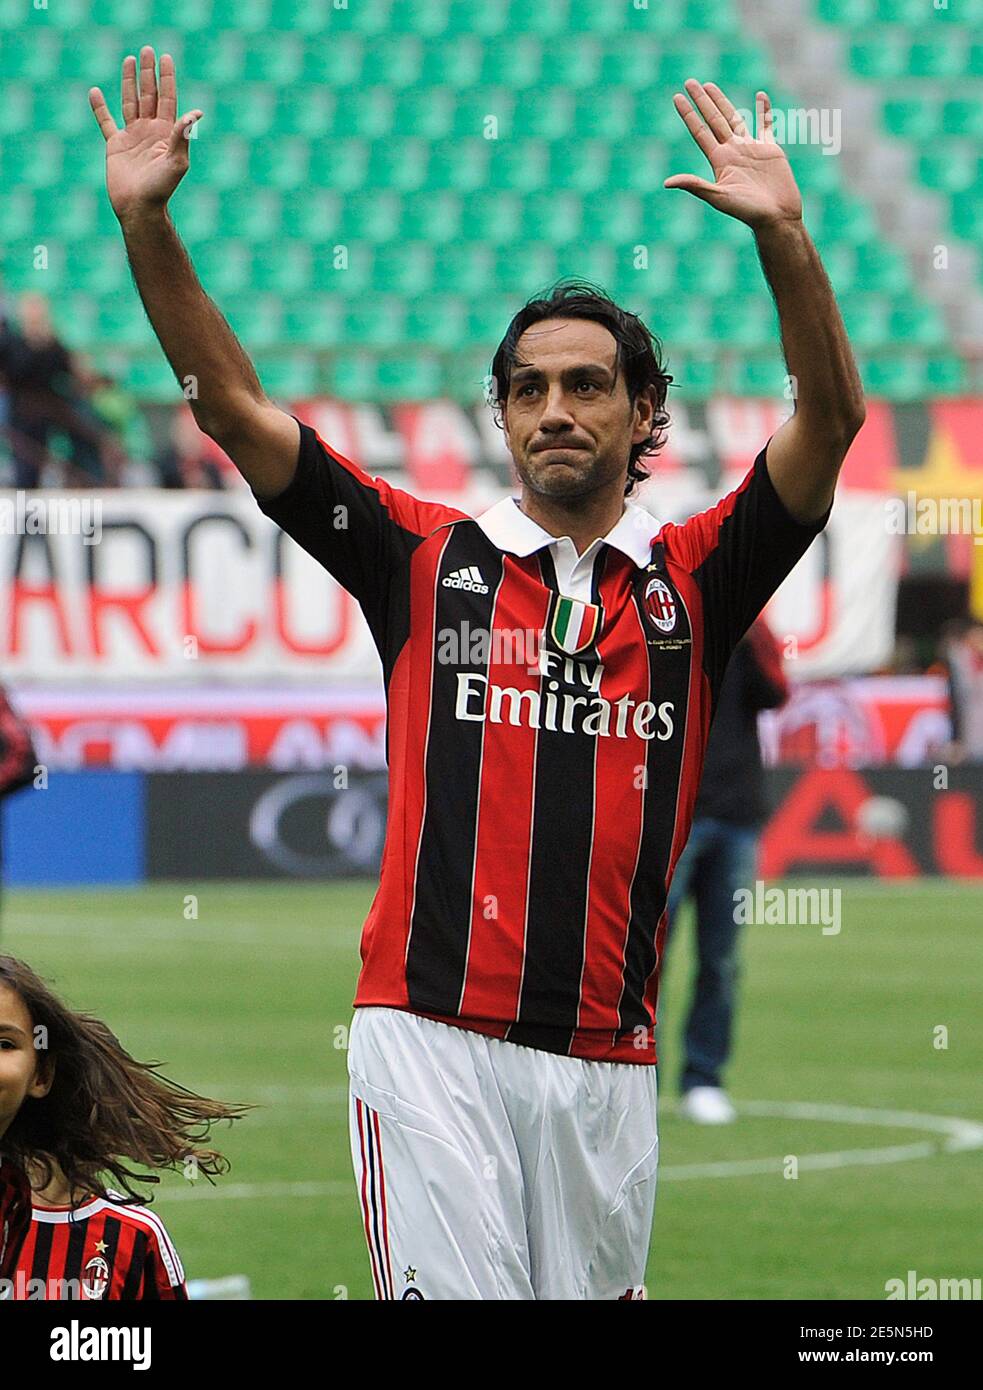 AC Milan's Alessandro Nesta greets supporters at the end of the Serie A  soccer match against Novara at the San Siro stadium in Milan May 13, 2012.  REUTERS/Paolo Bona (ITALY - Tags: